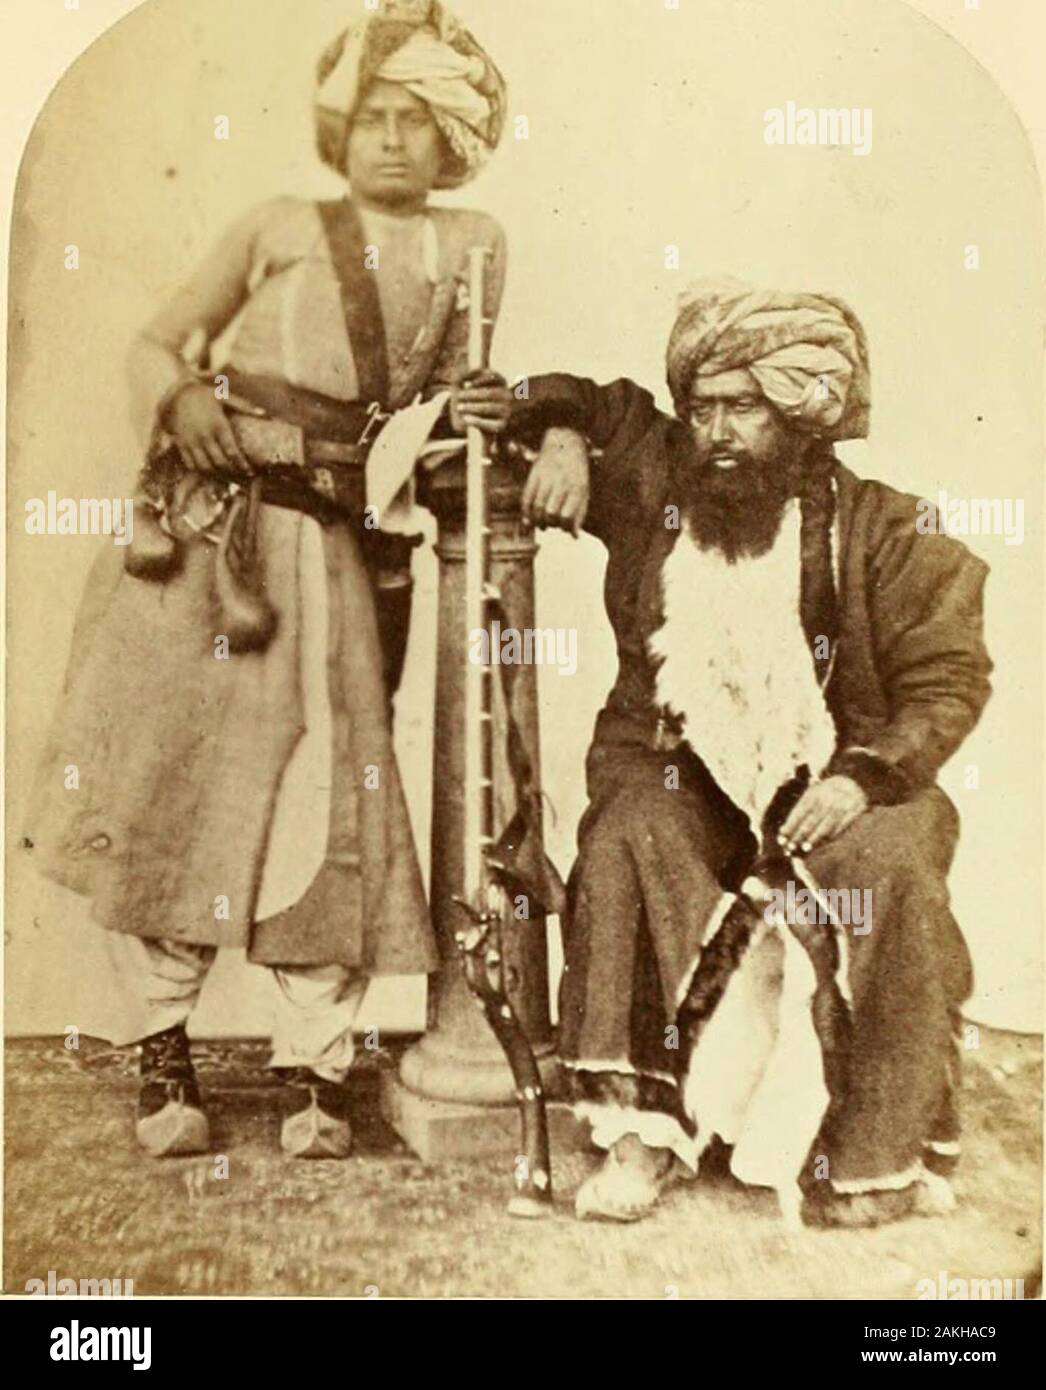 The people of India : a series of photographic illustrations, with descriptive letterpress, of the races and tribes of Hindustan . freedees of Kohat, as they are also of a milder and more settledcharacter. They are, however, as equally ignorant, haughty, and fanatical, as allother frontier tribes, though by no means so fierce and dangerous as some. Likethe rest, they have bound themselves to the British Government by solemnagreements, and it is only just to state, in respect to the Khuttuks, that theyappear to be faithfully observed. The Photograph represents the chief of the Khuttuk tribe or Stock Photo